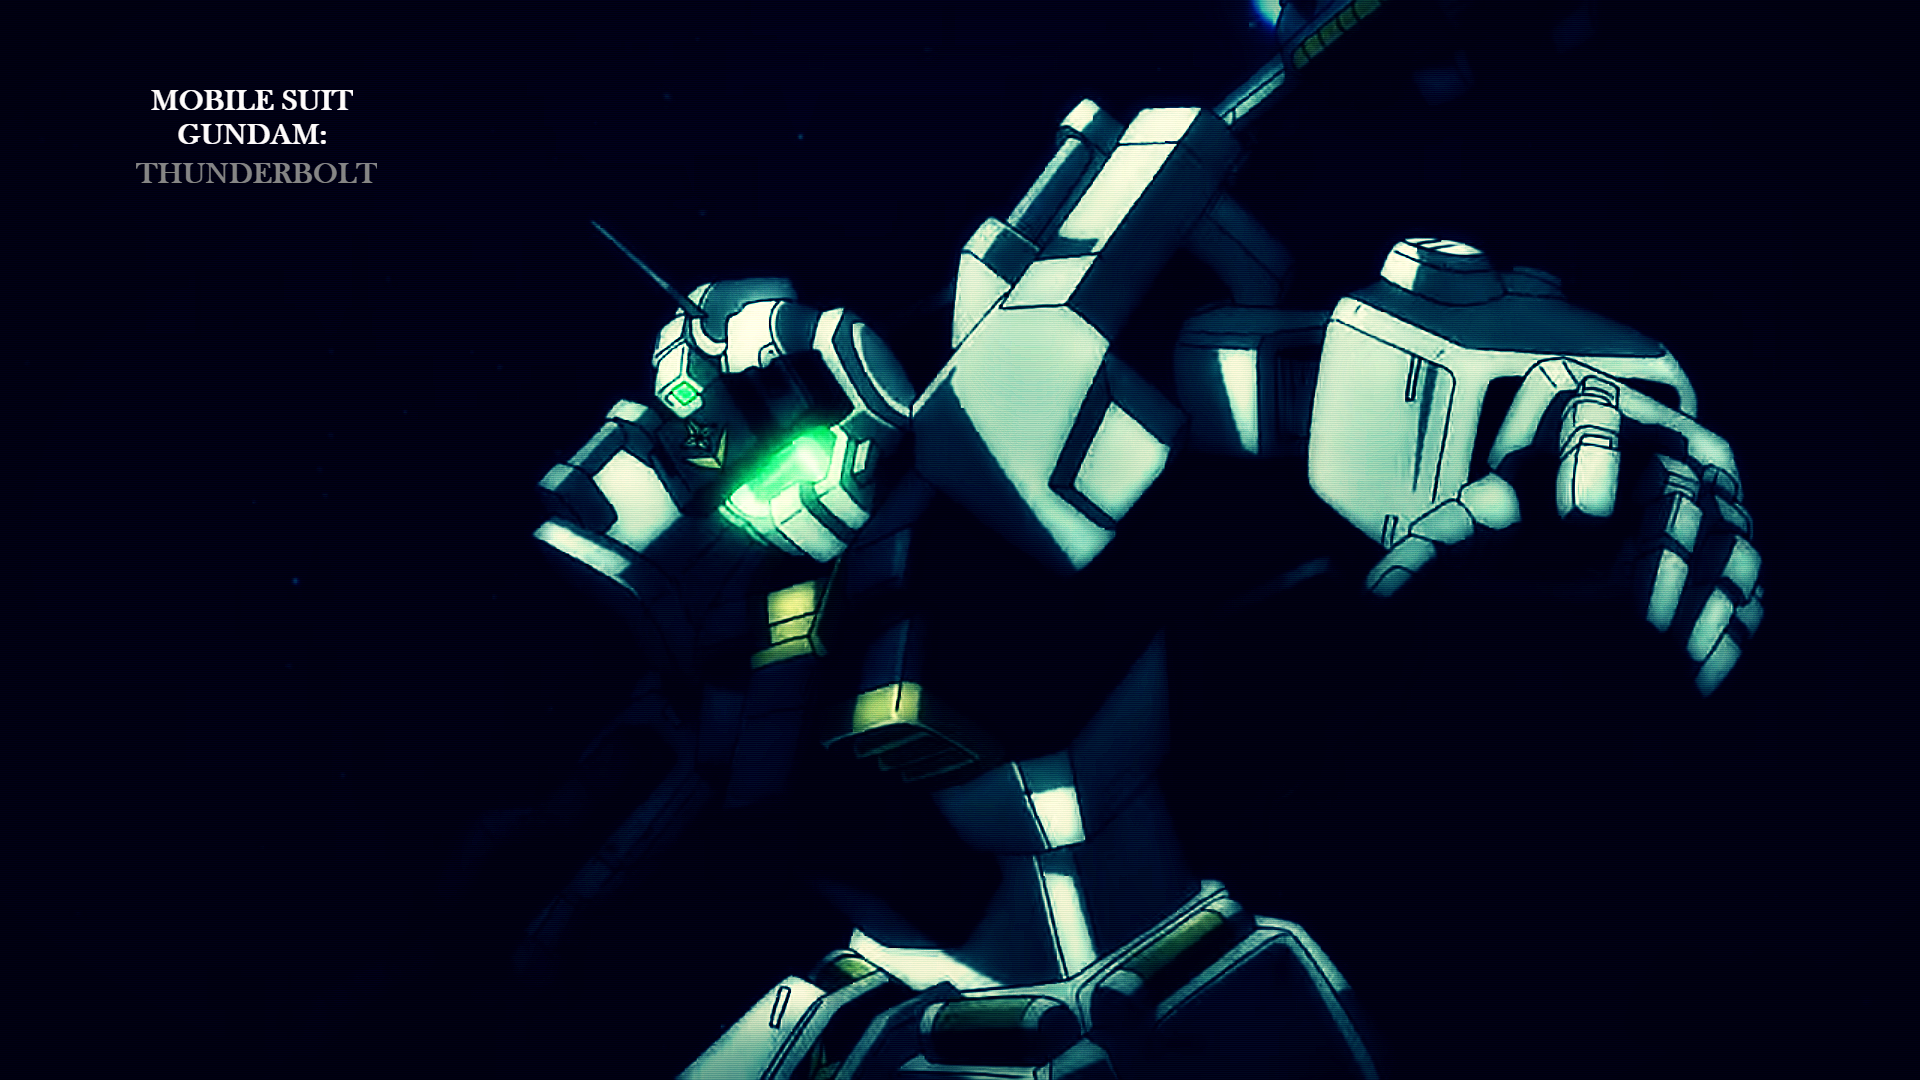 Here is another thunderbolt wallpaper rgundam